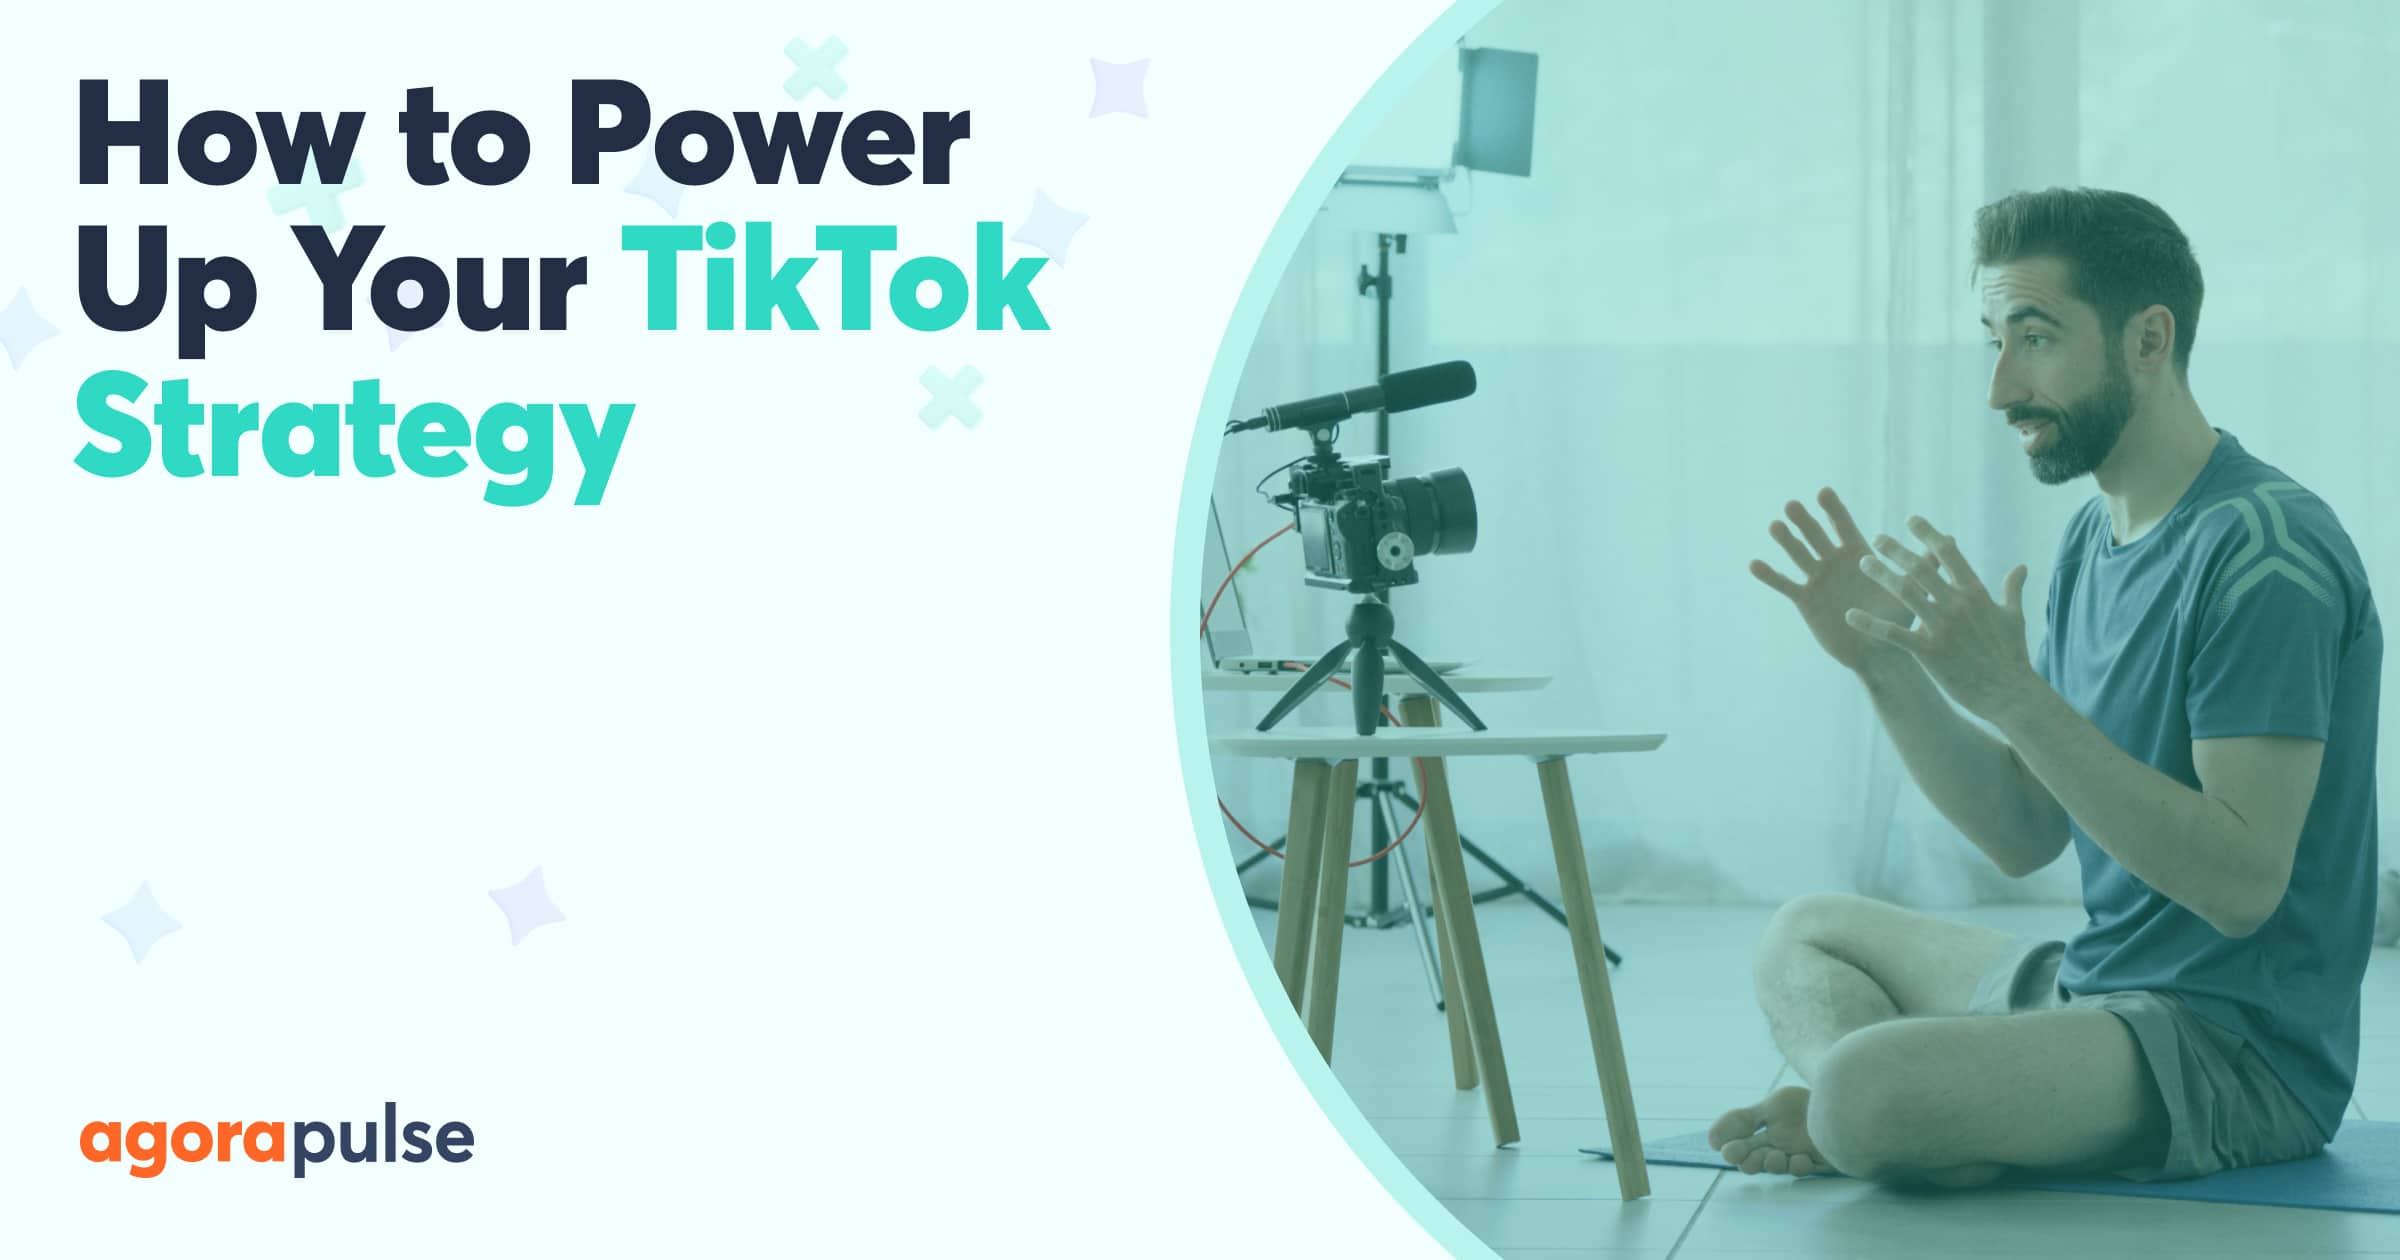 https://www.agorapulse.com/blog/wp-content/uploads/sites/2/2020/01/How-to-Power-Up-Your-TikTok-Strategy-Opengraph-1200x630-R1.jpg